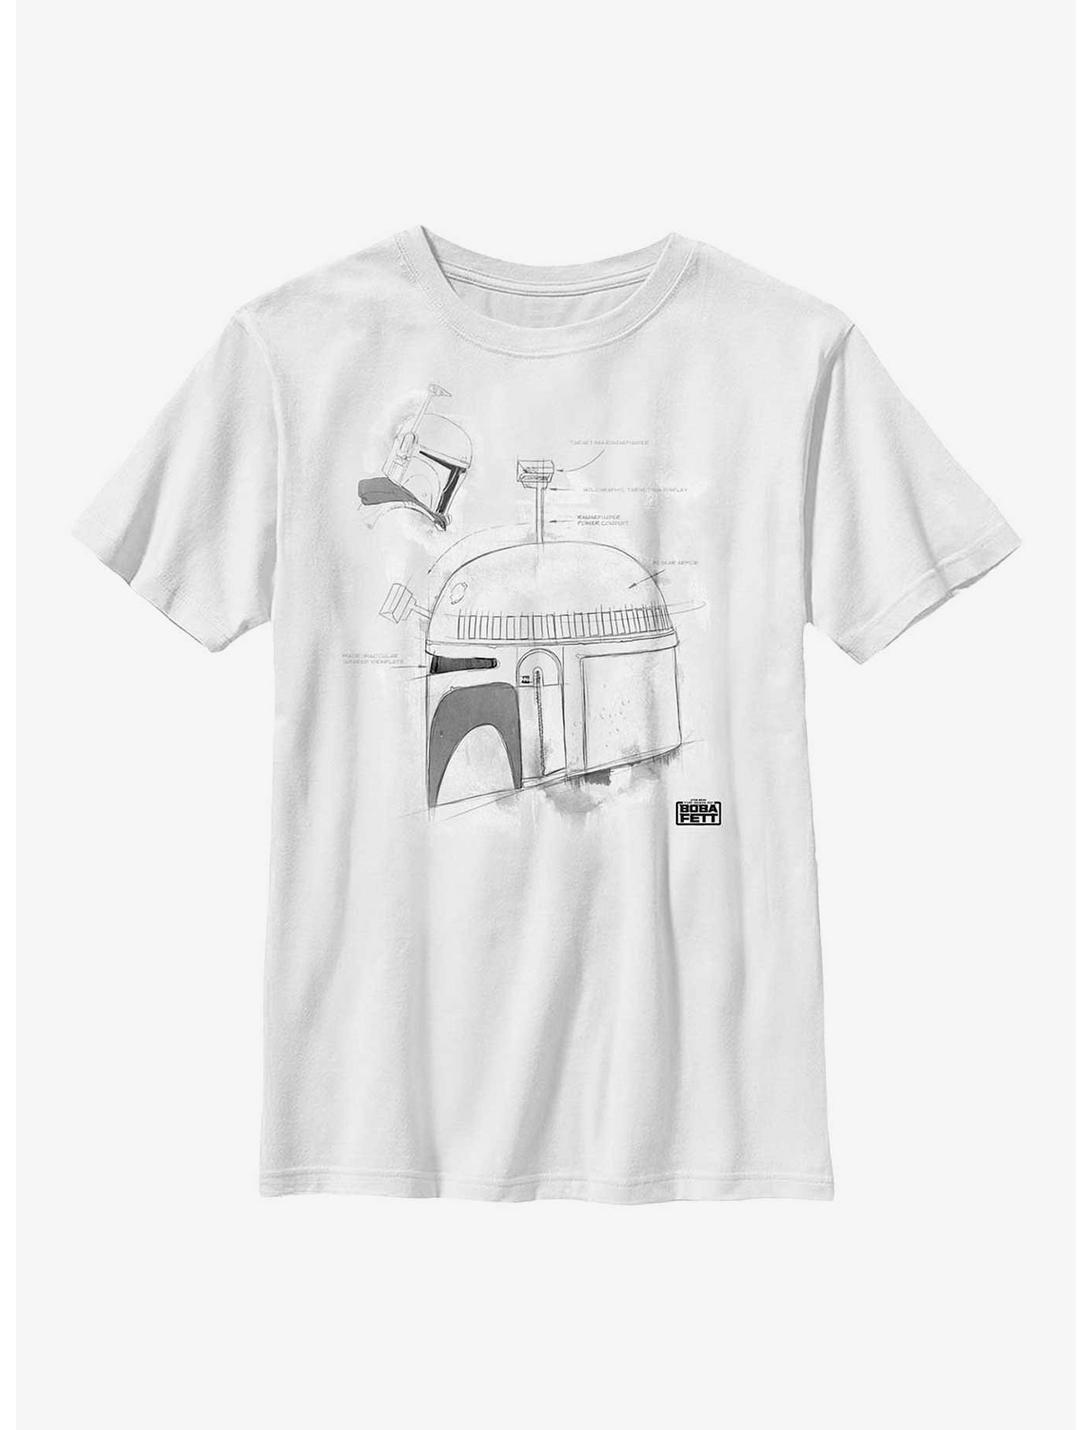 Star Wars: The Book Of Boba Fett Grayscale Helmet Sketch Youth T-Shirt, WHITE, hi-res